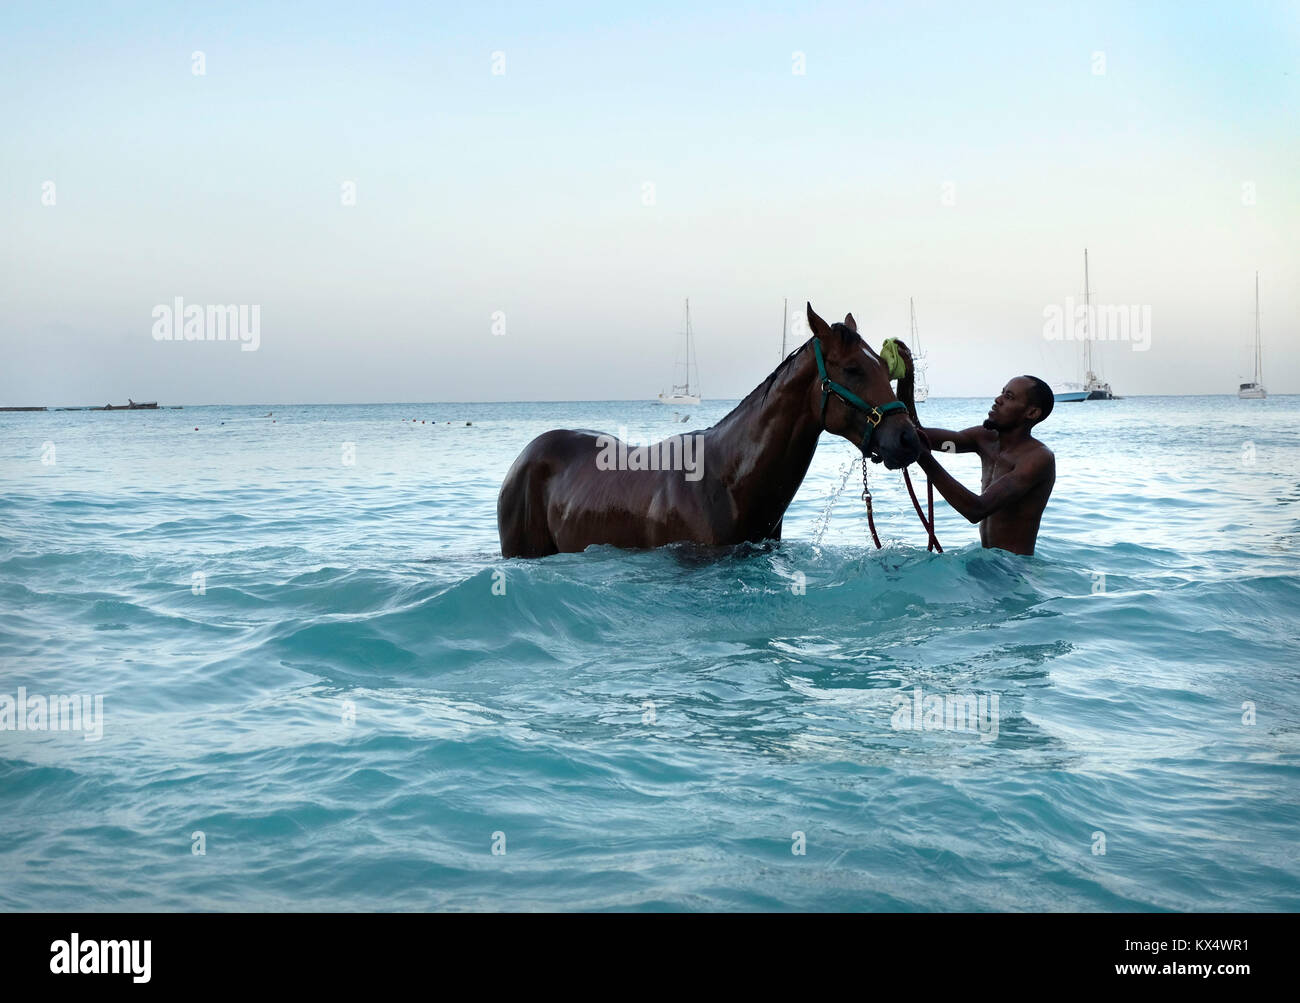 Bridgetown, Barbados. 07th Jan, 2018. A stable hand bathes a race horse at dawn after the first day of the new horse racing season in Barbados yesterday (Saturday 6th) at Browns Beach near Bridgetown, Barbados.  Horse Racing is an important part of Barbados' heritage and dates back to 1845 when the tiny island was part of the British Empire. Kiran Ridley Credit: Michael Olivers/Alamy Live News Stock Photo